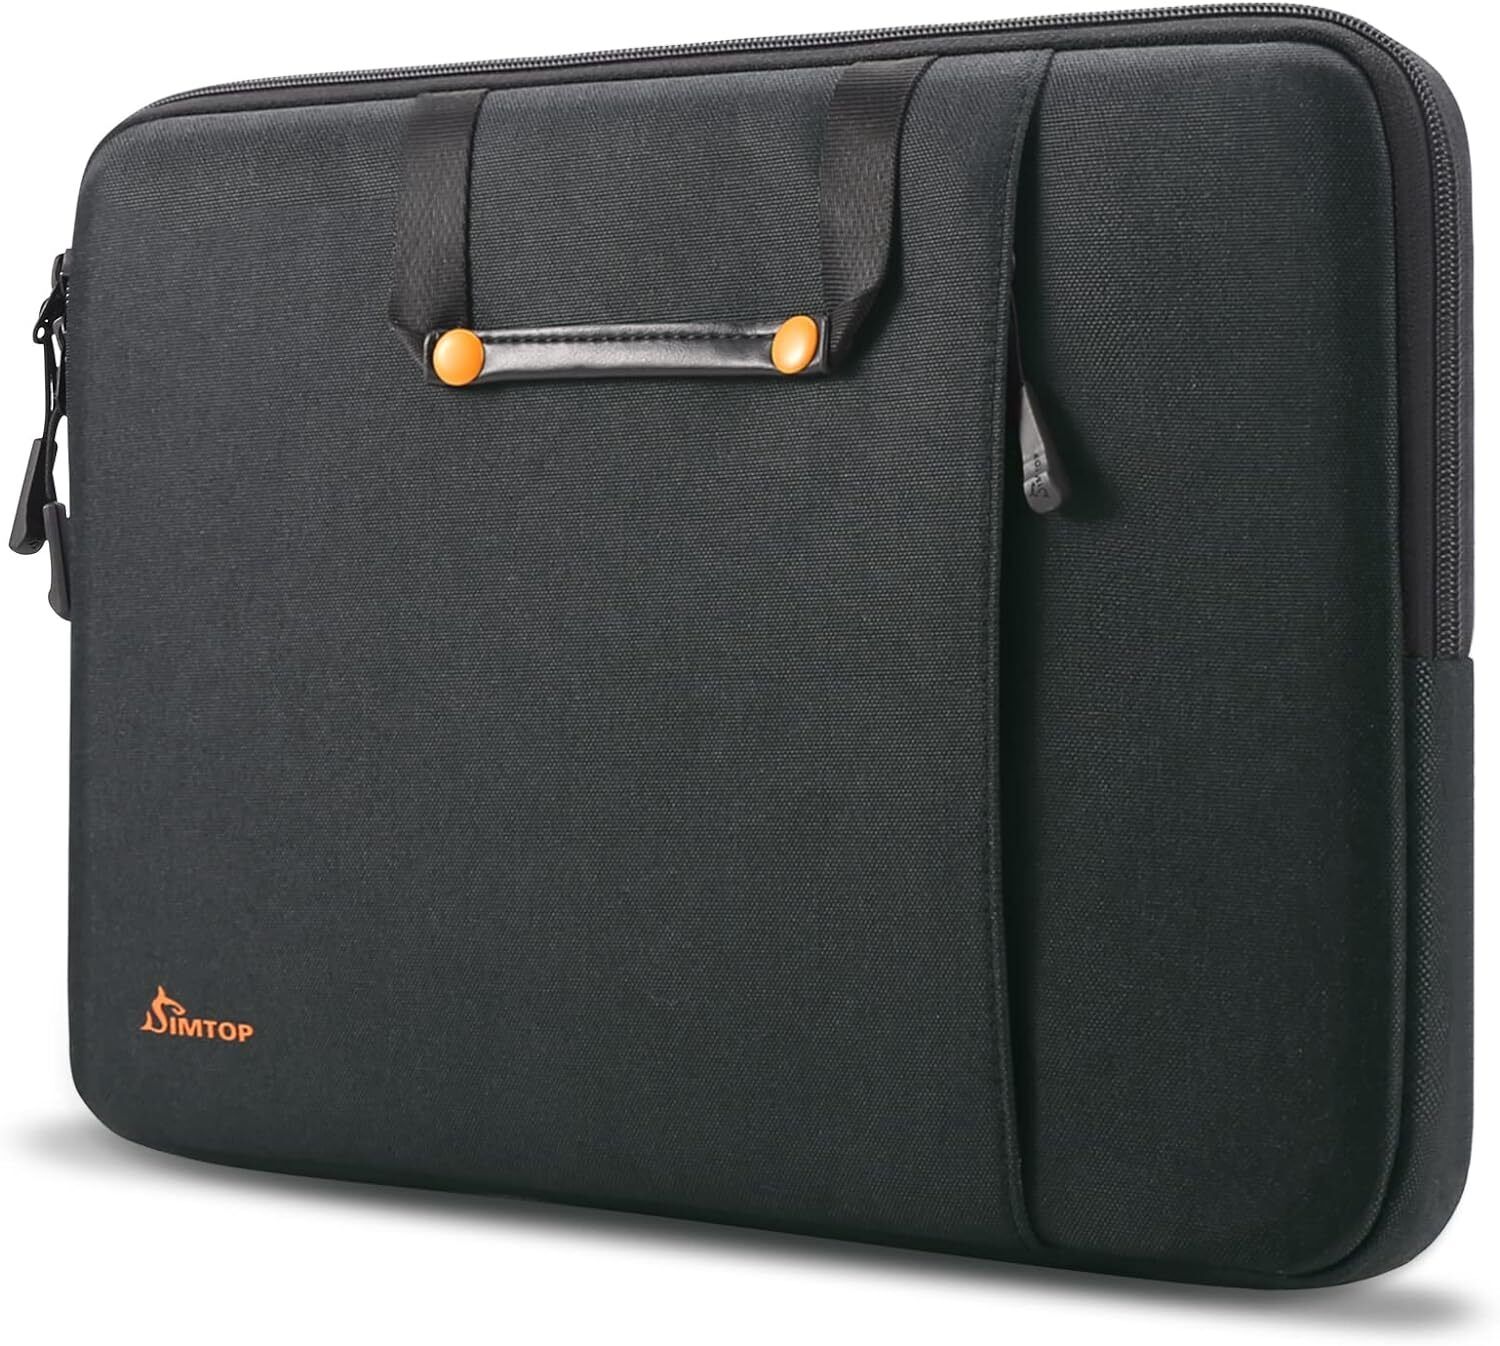 SIMTOP Polyester Laptop Case for MacBook Air/Pro, 13 - 16 Inch Notebook